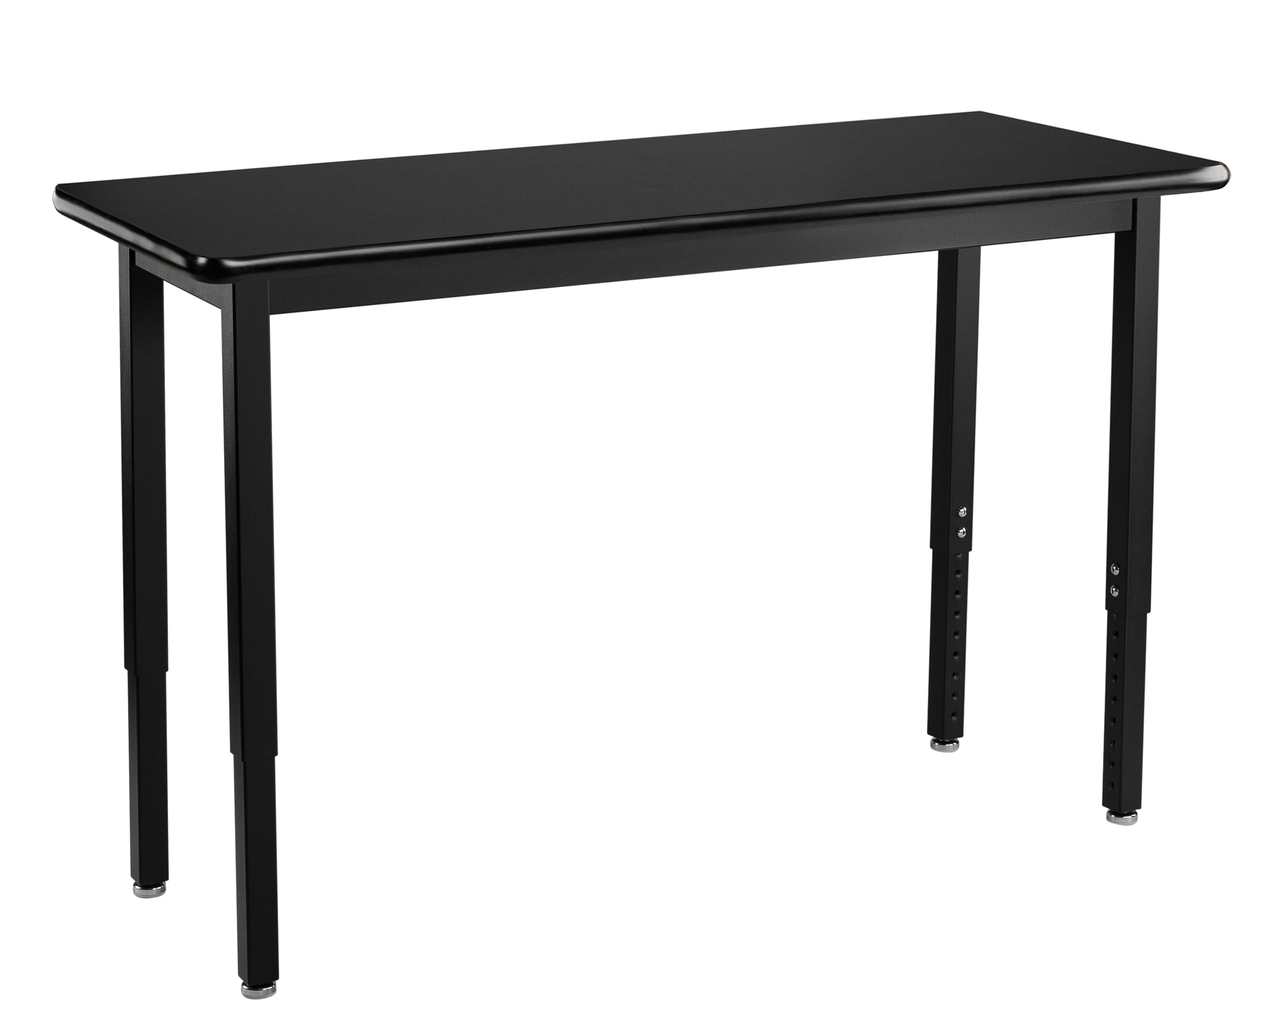 NPS Steel Science Lab Table -  18" x 54" -  HPL Top - Black Surface Color